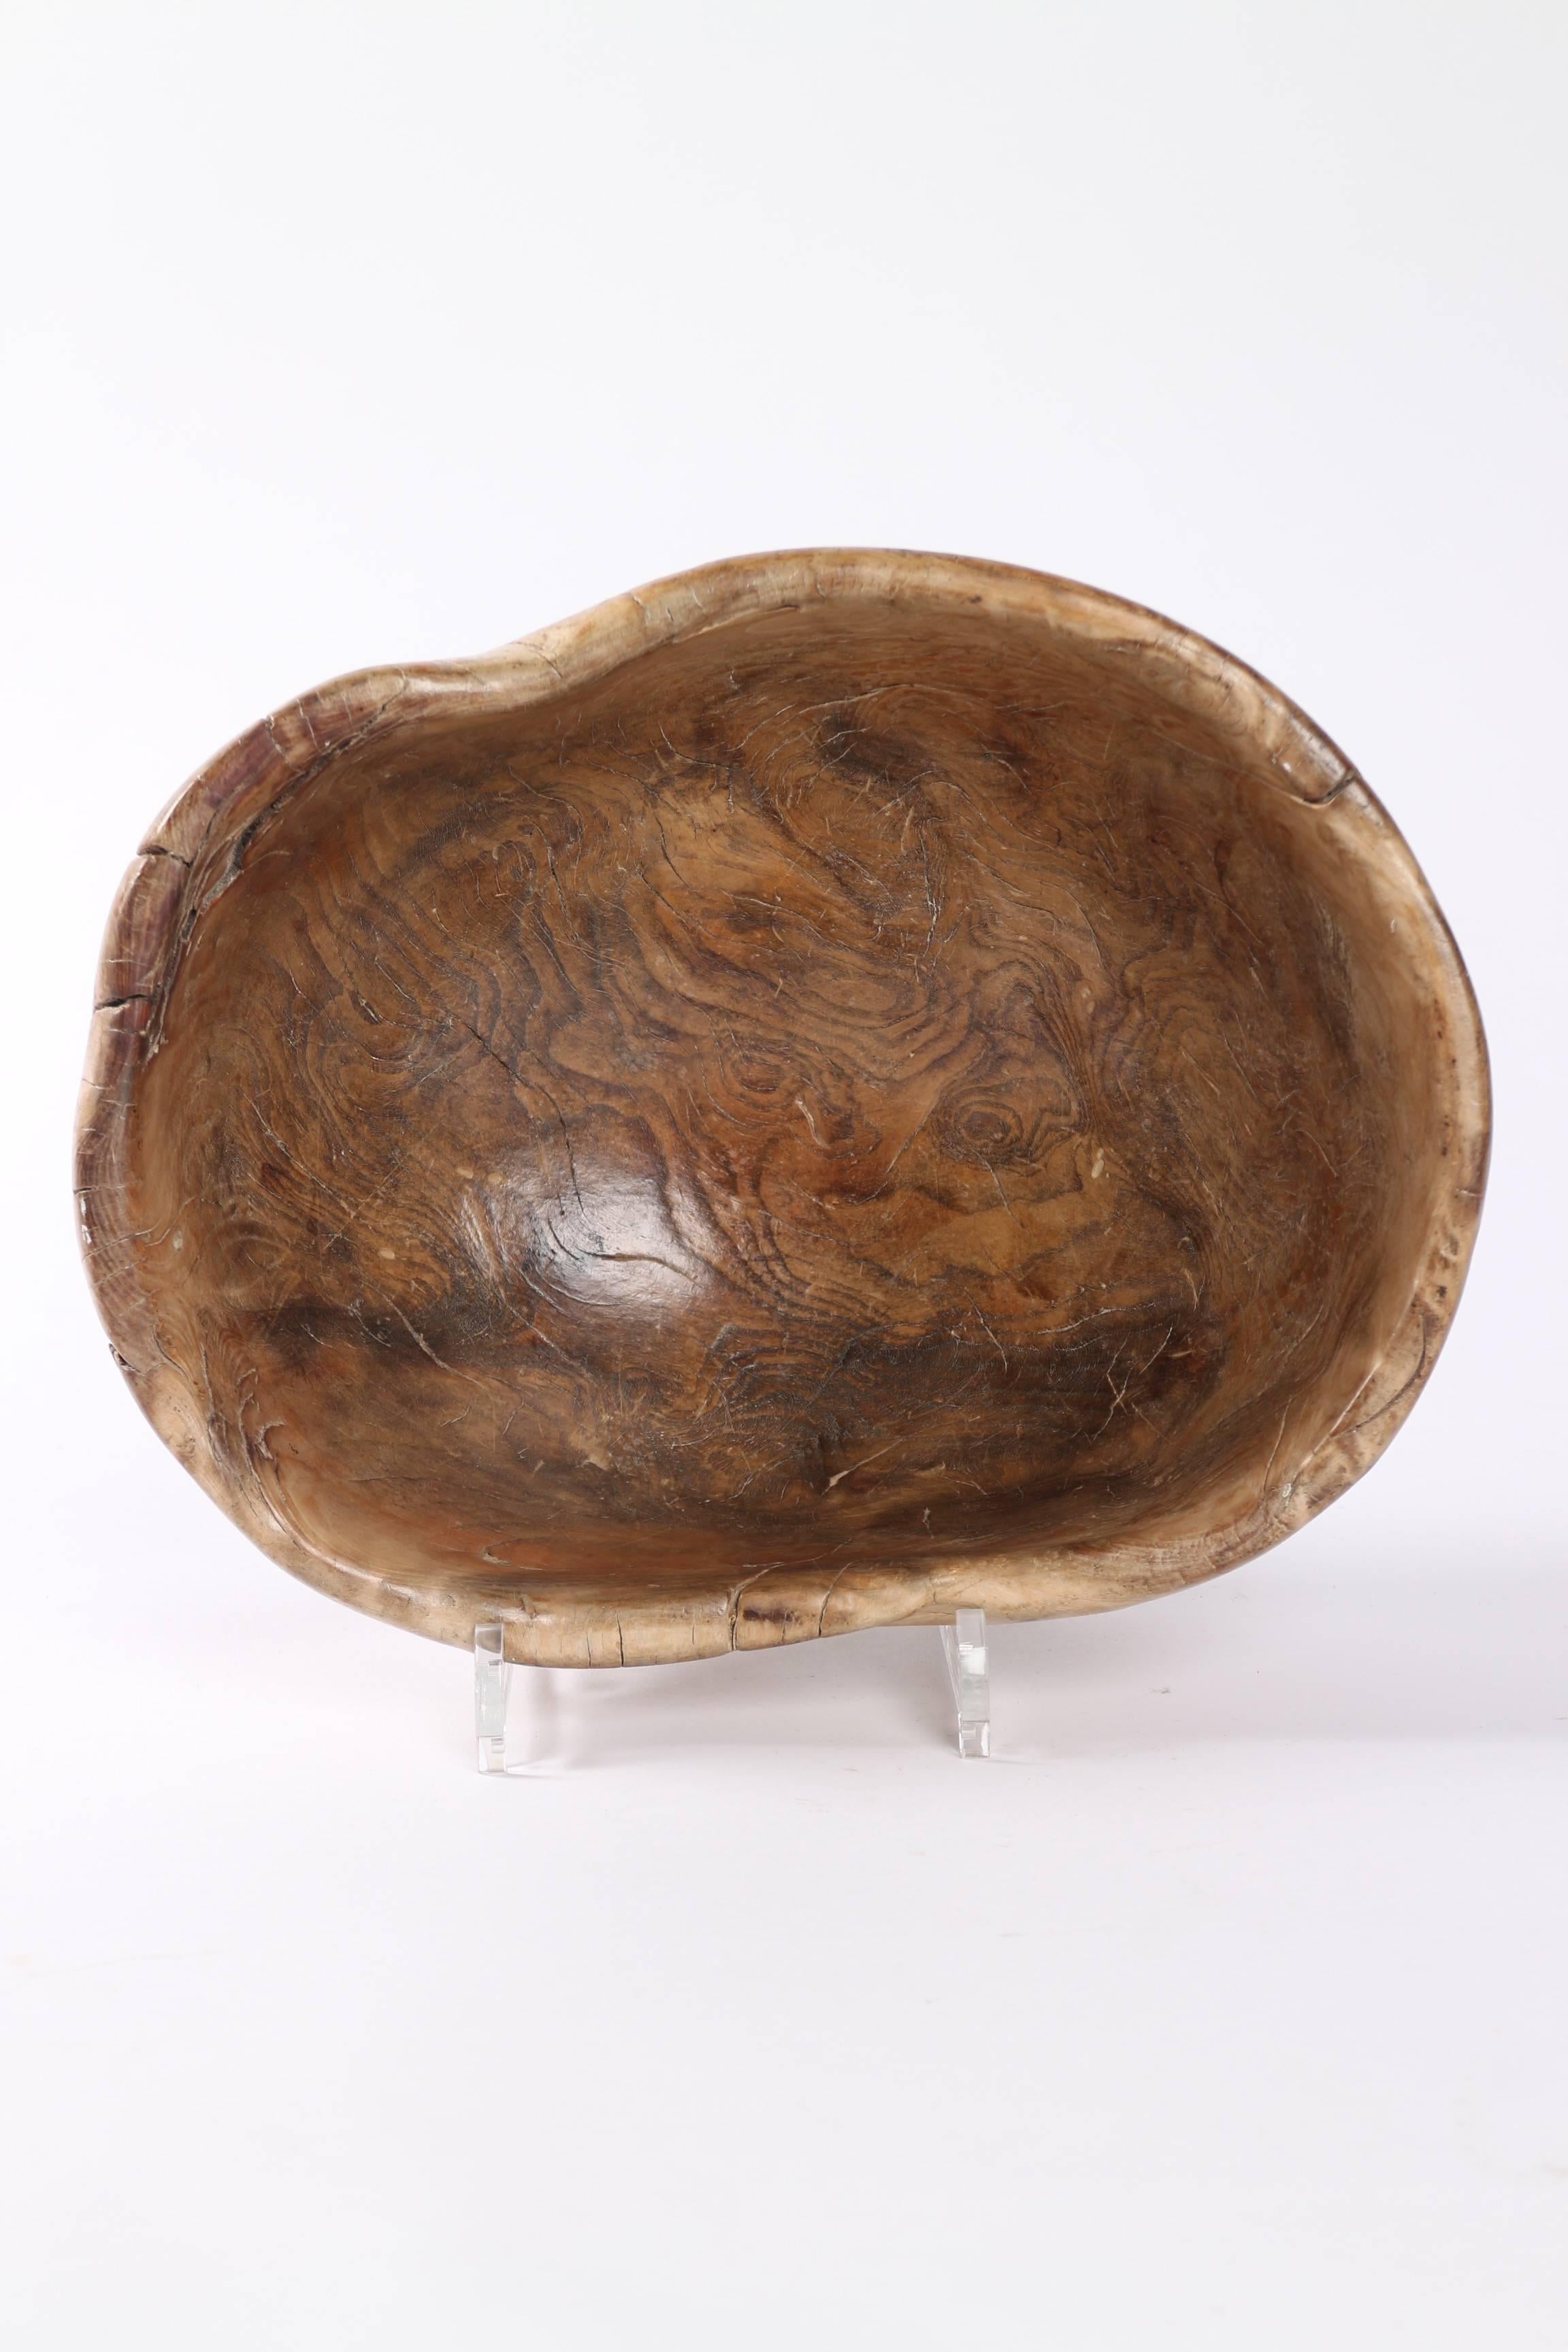 Beautiful and very pure wooden bowl
Sweden, lapland, early 19th century.